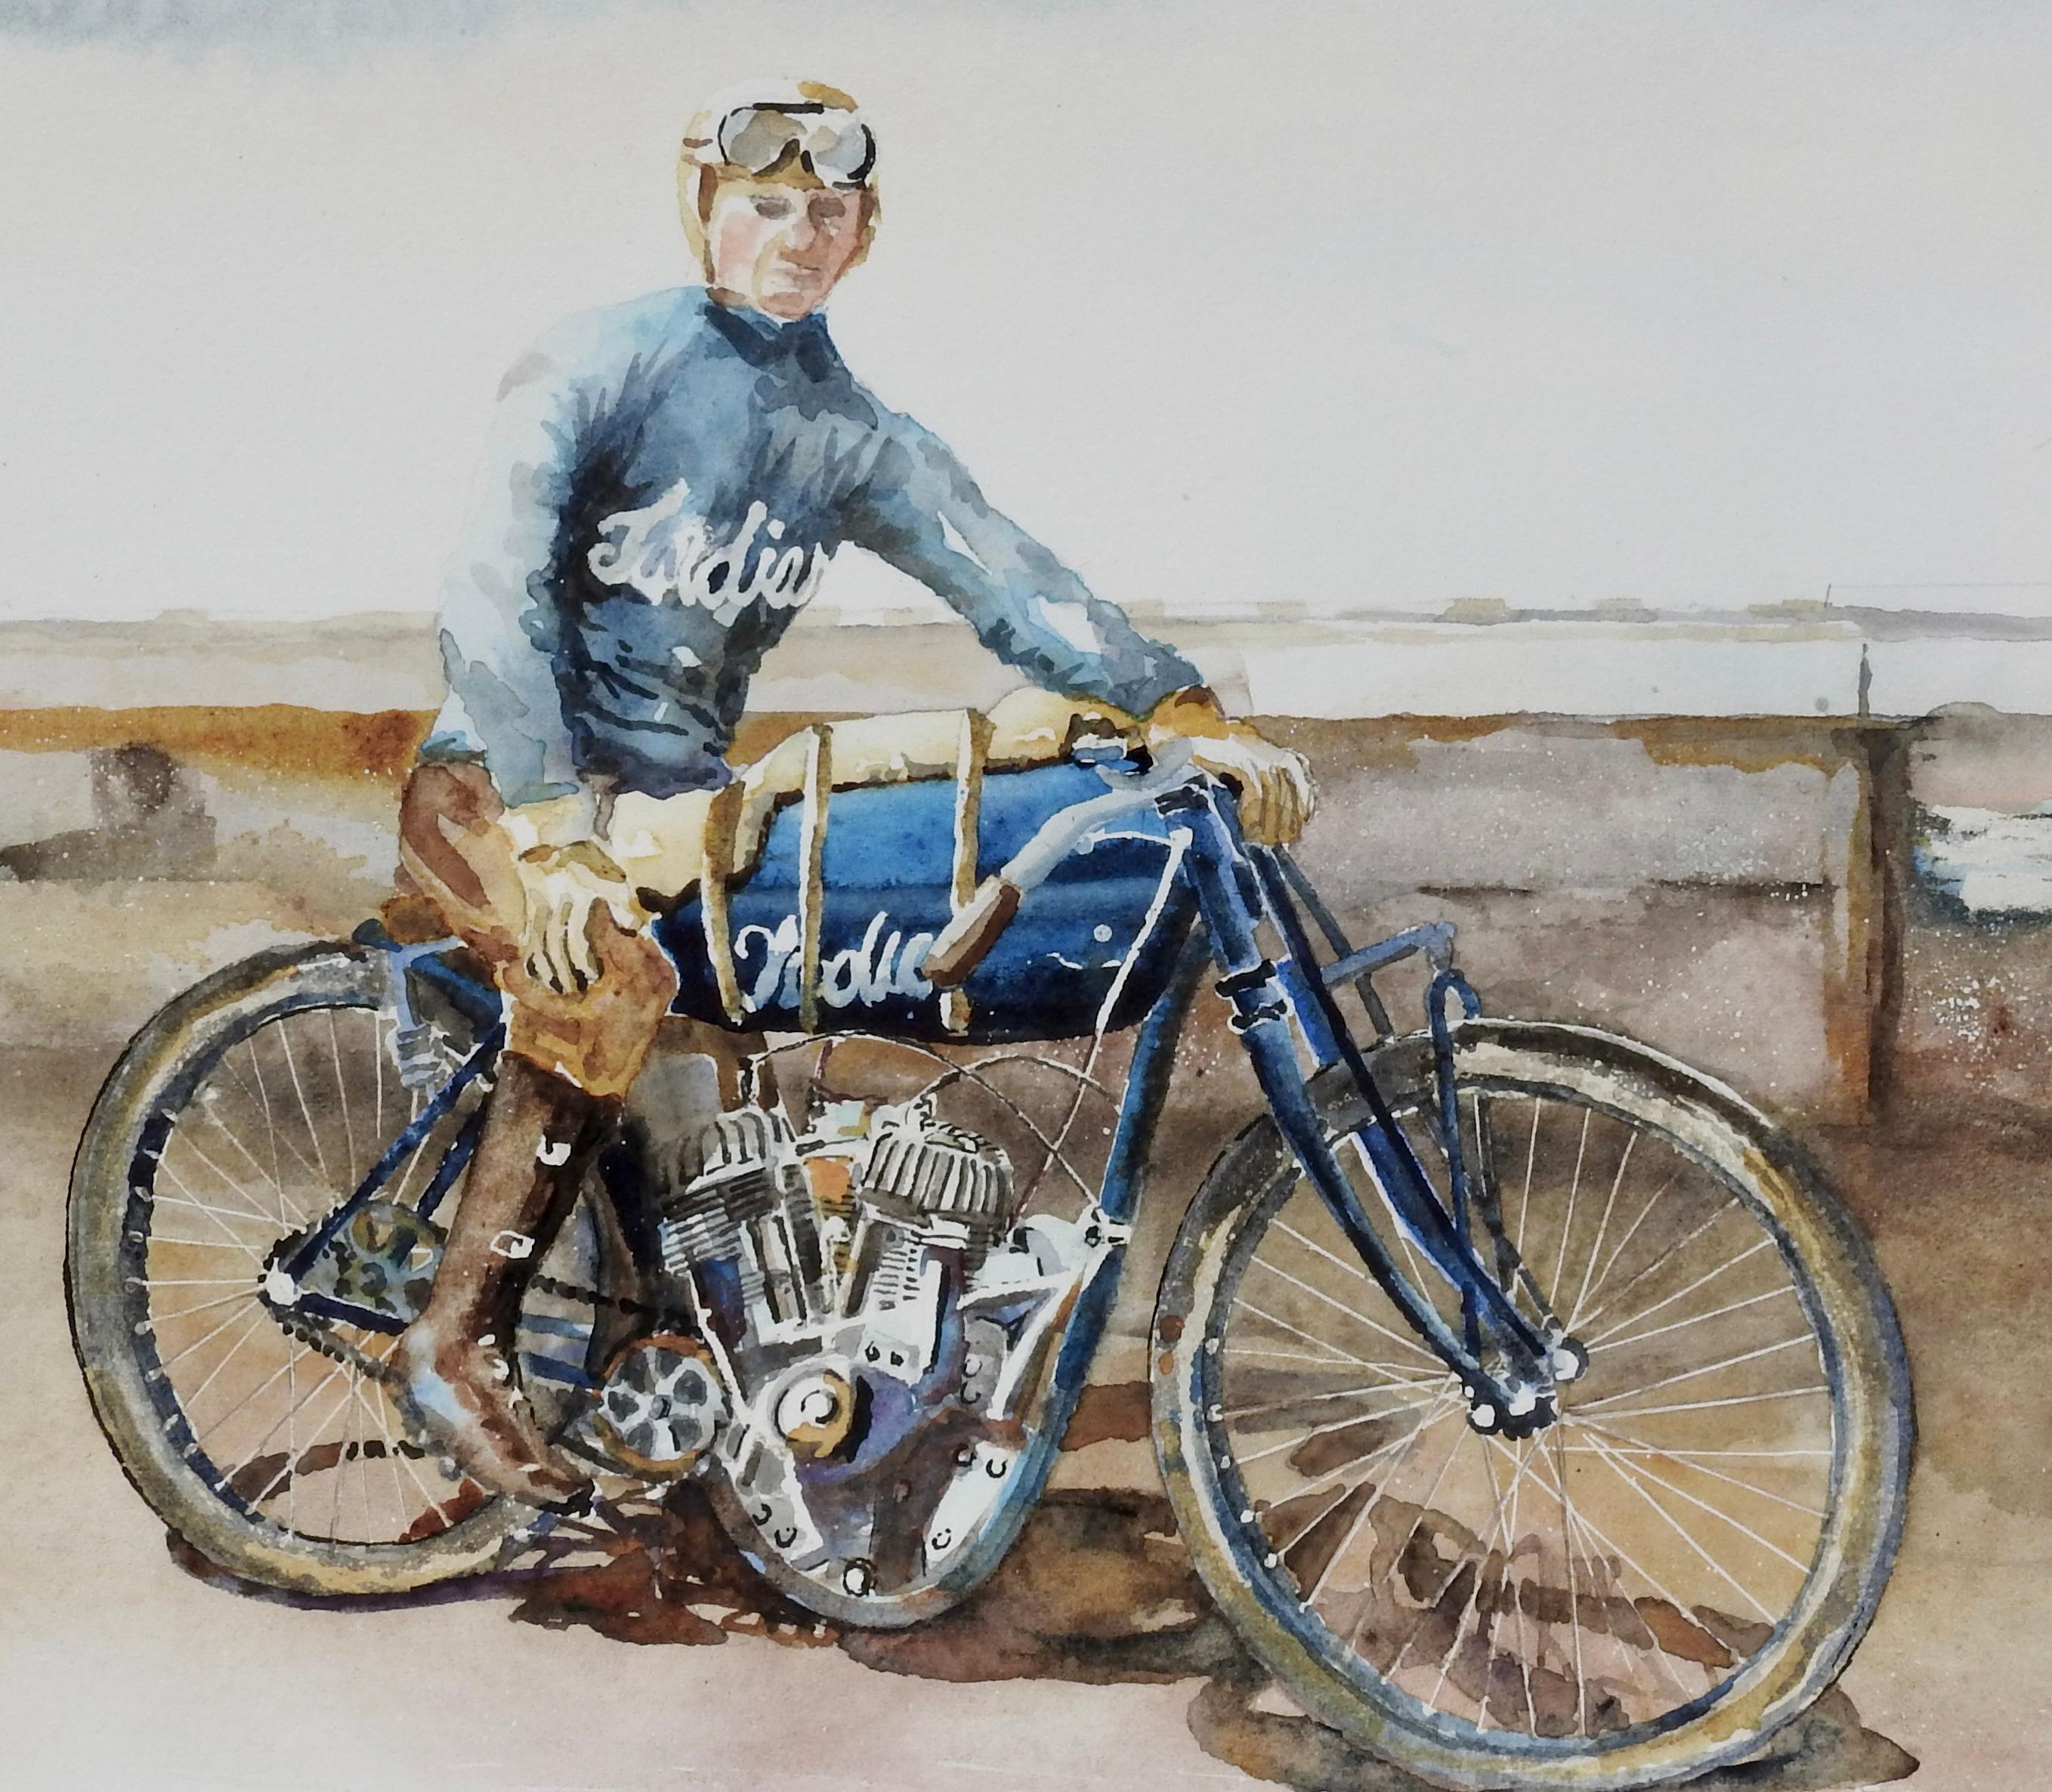 <p>Artist Comments<br>A rider halts on a dirt track, possibly appreciating the scenery around him. Fueled by his passion for motorcycle racing in his twenties, artist Thomas Hoerber developed a lasting love for the sport. After stumbling on a